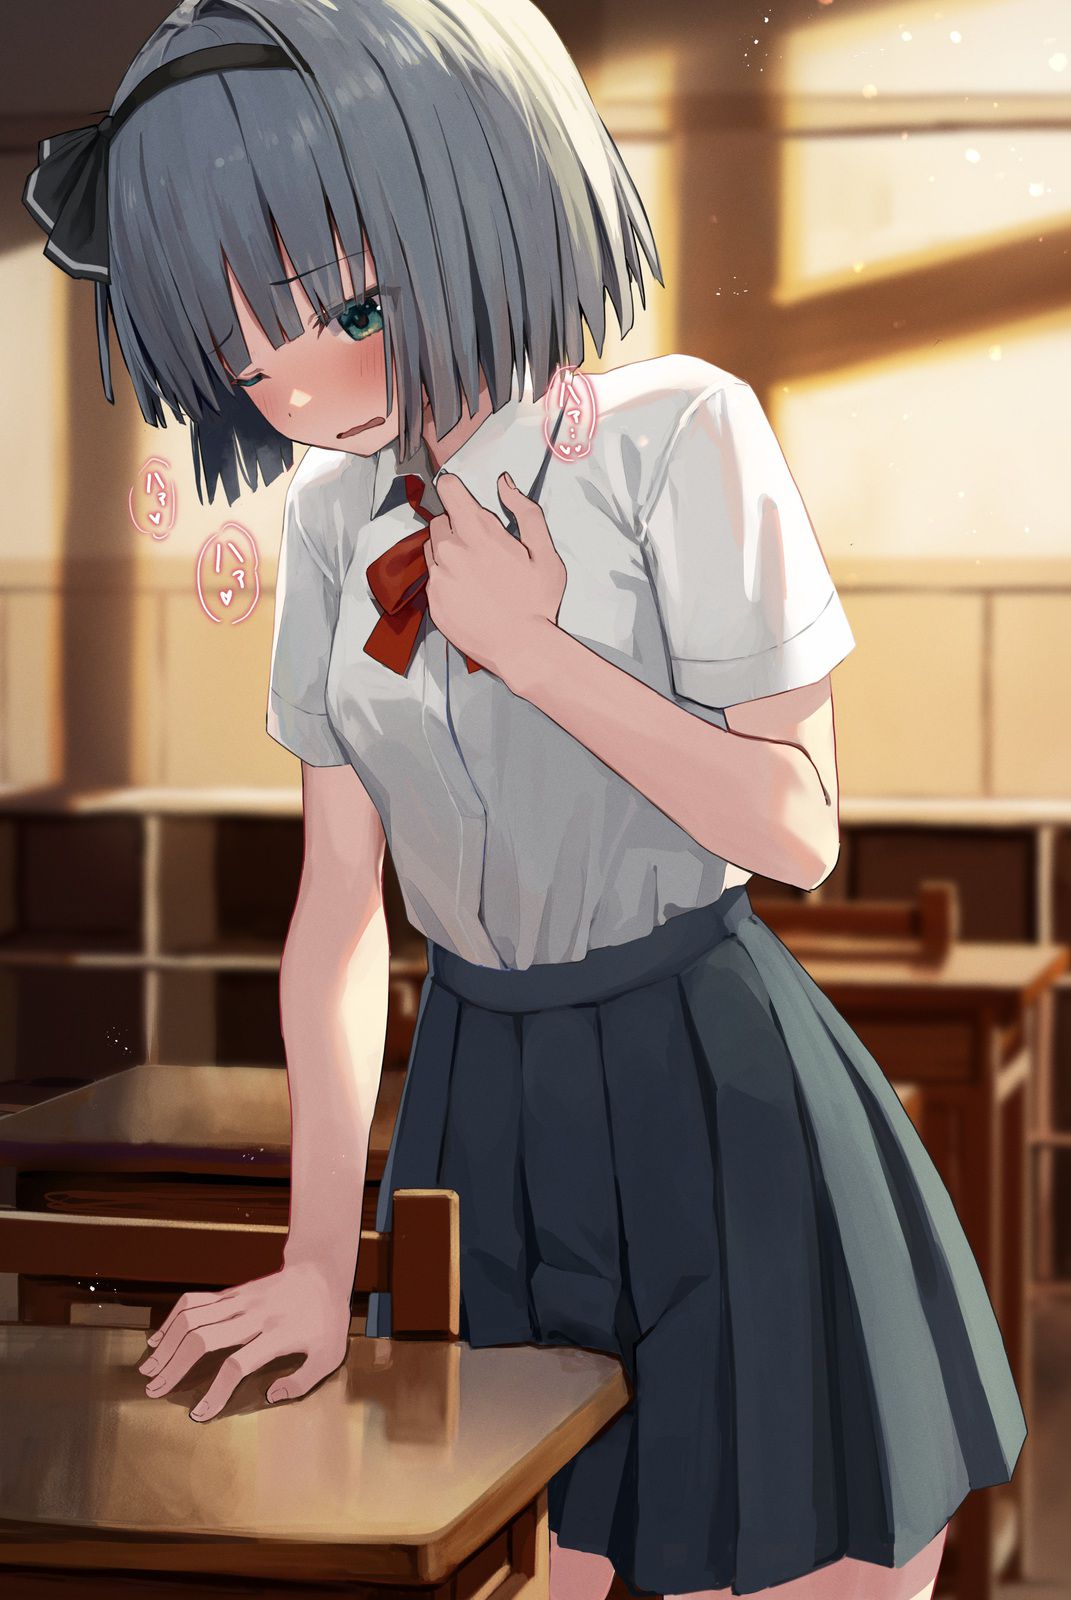 [Kaku Ona Lori Girl] Secondary erotic image of a secondary loli girl indulging in angular masturbation that she can't stand pressing her crotch against the desk 53